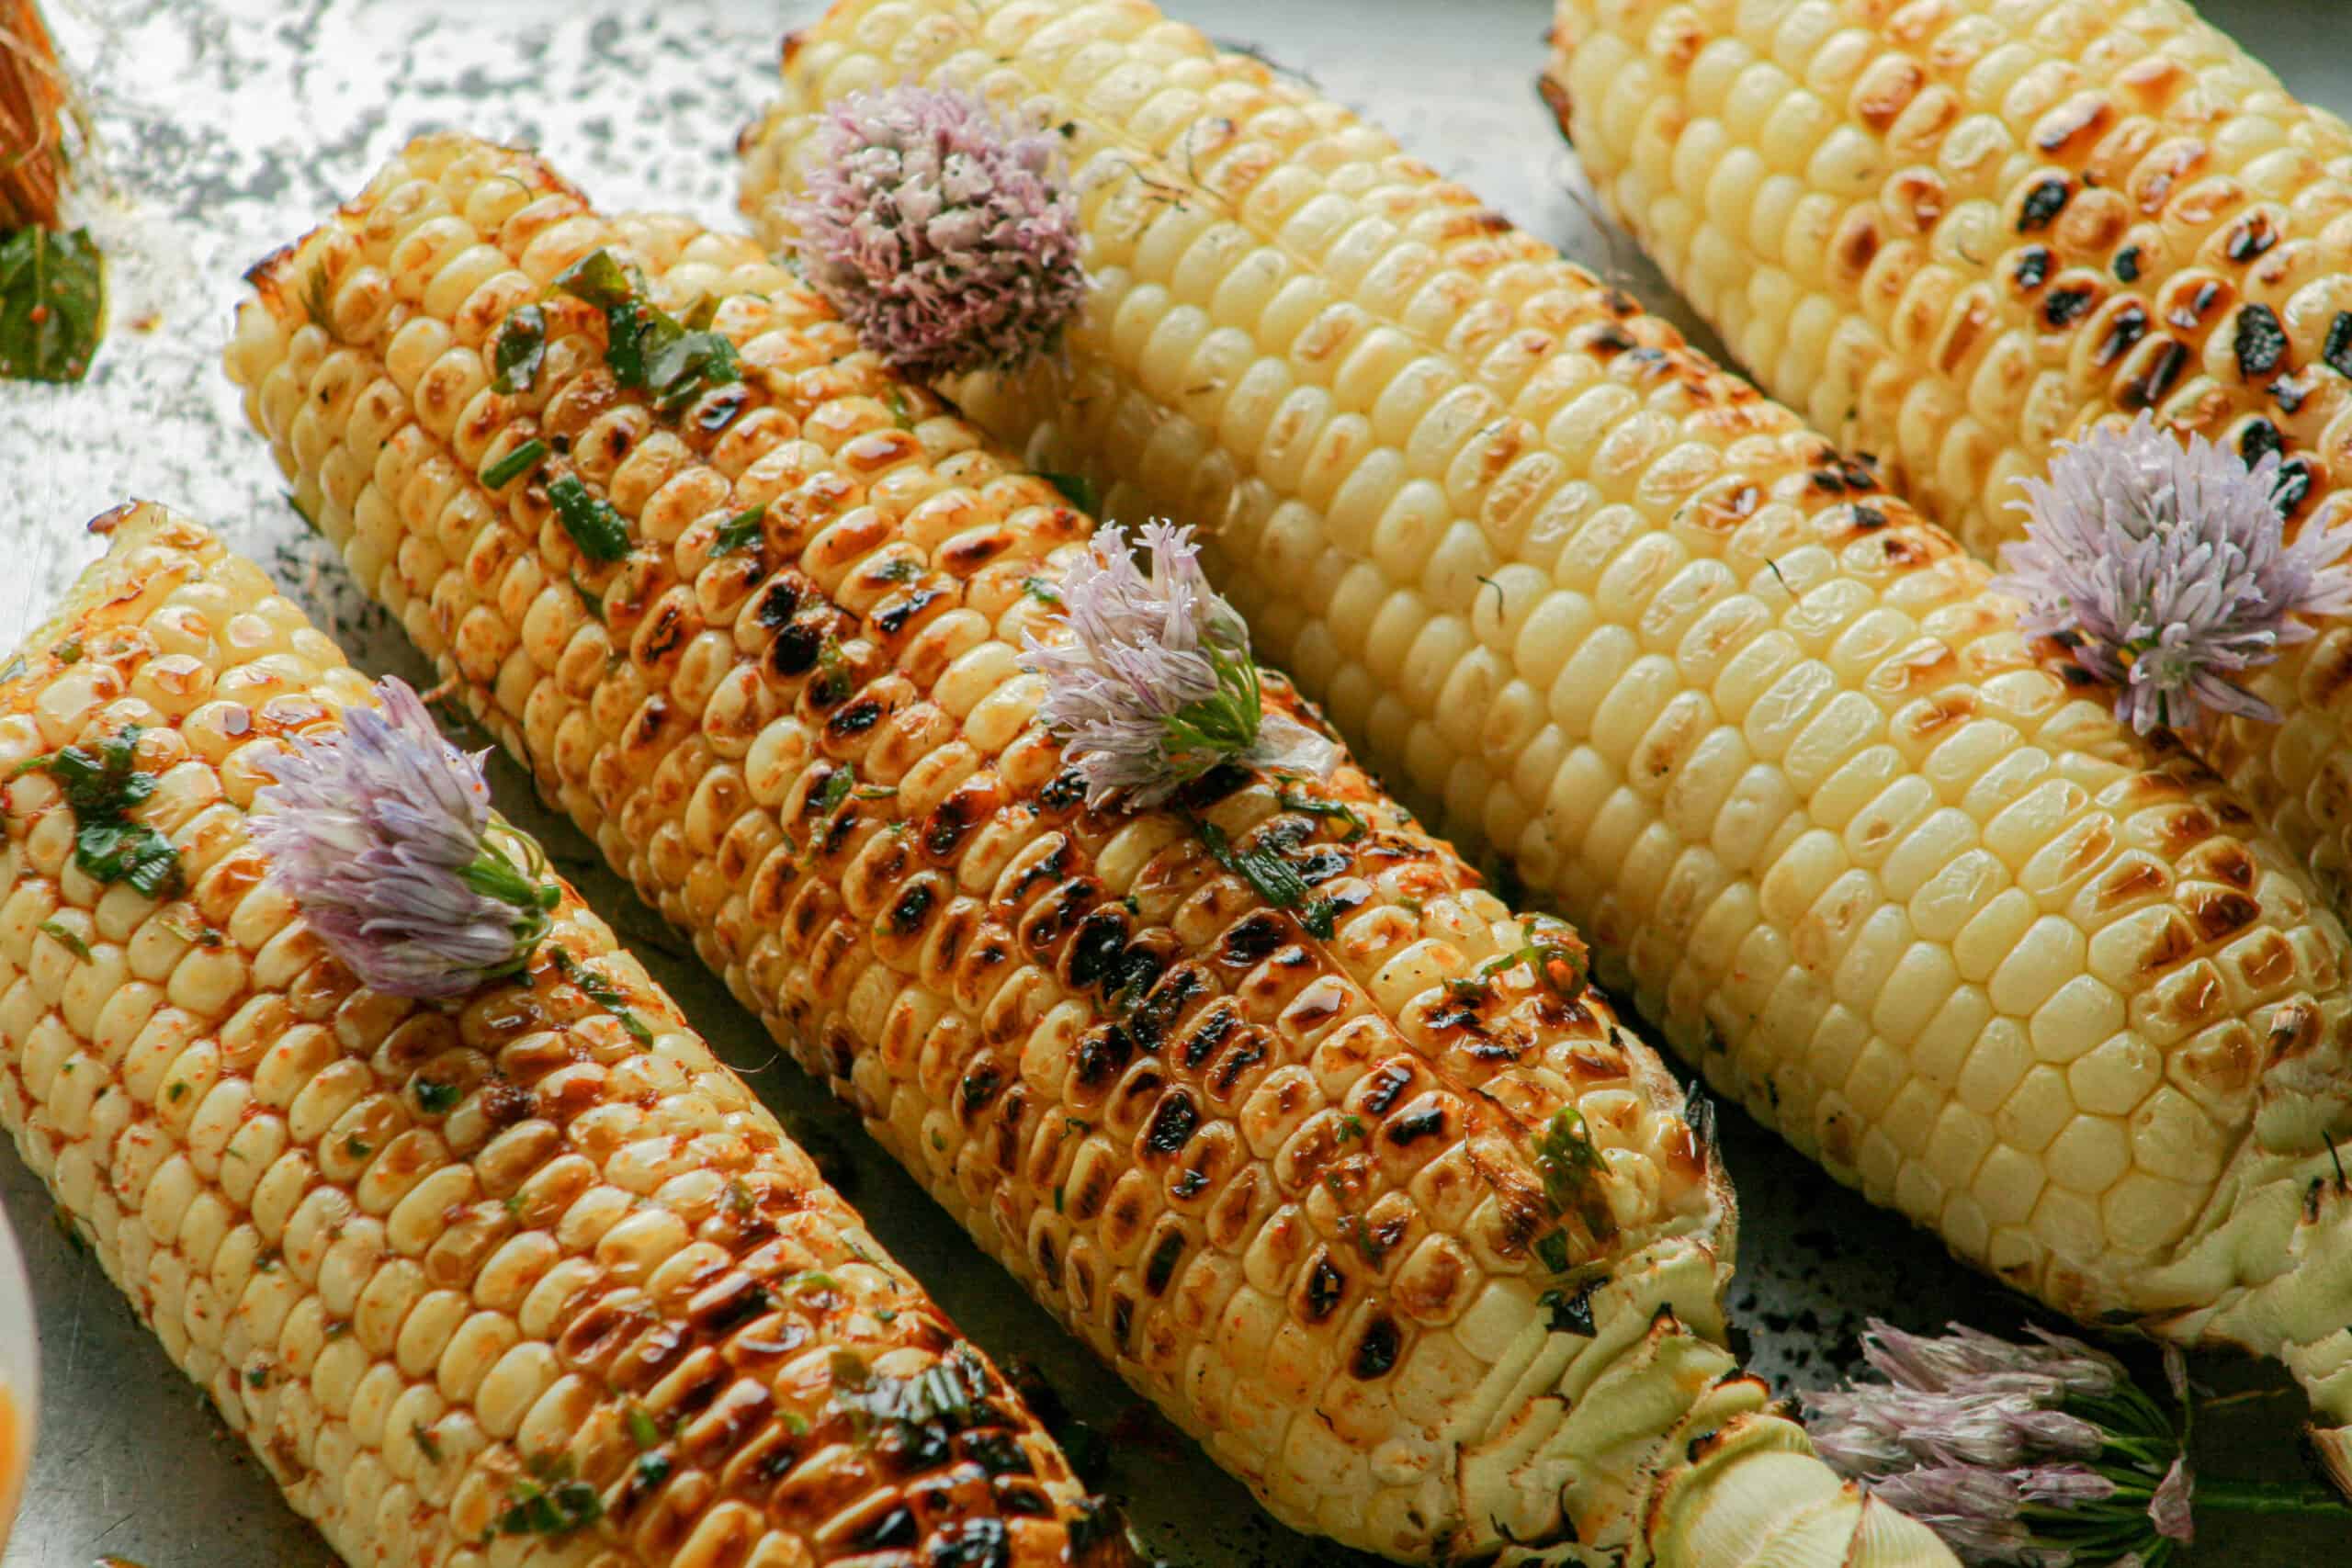 Grilled corn on the cob with herbed garlic butter. Photographed on a metal baking tray.